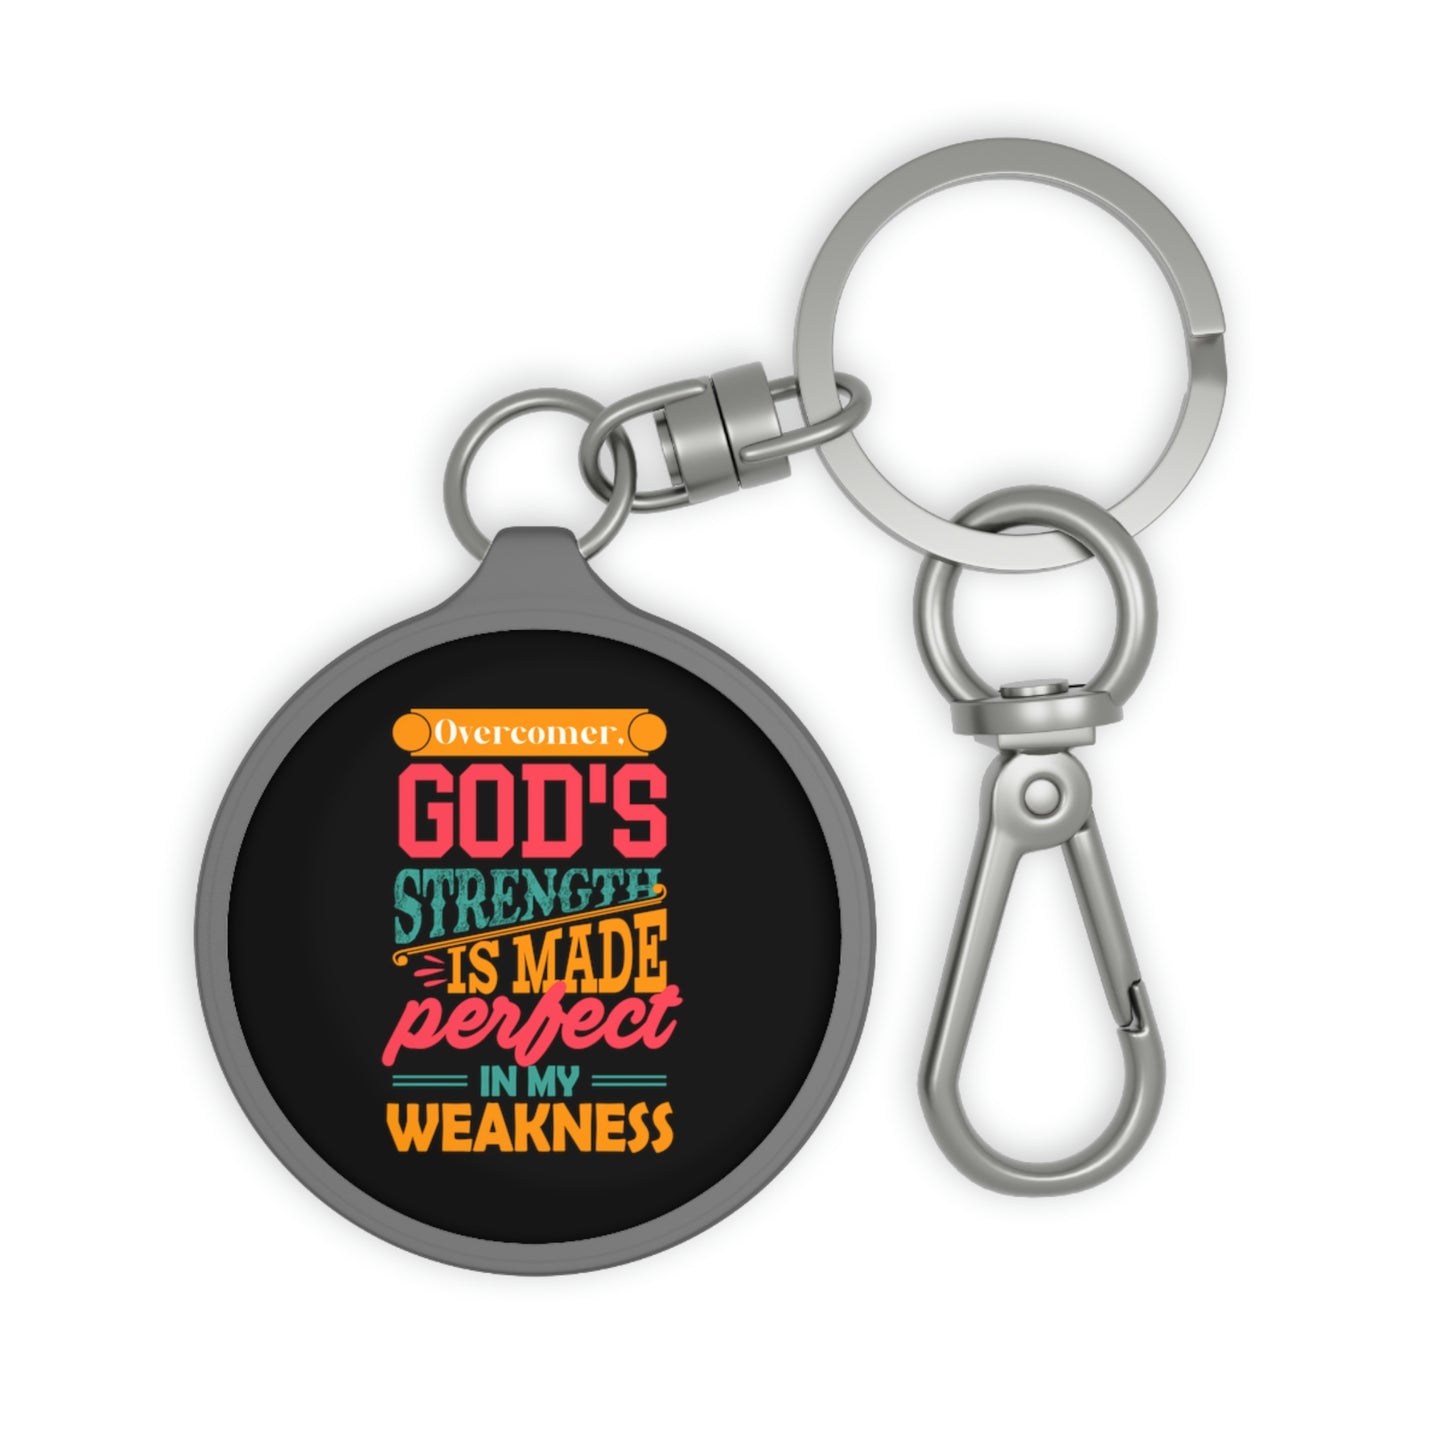 Overcomer, God's Strength Is Made Perfect In My Weakness Key Fob